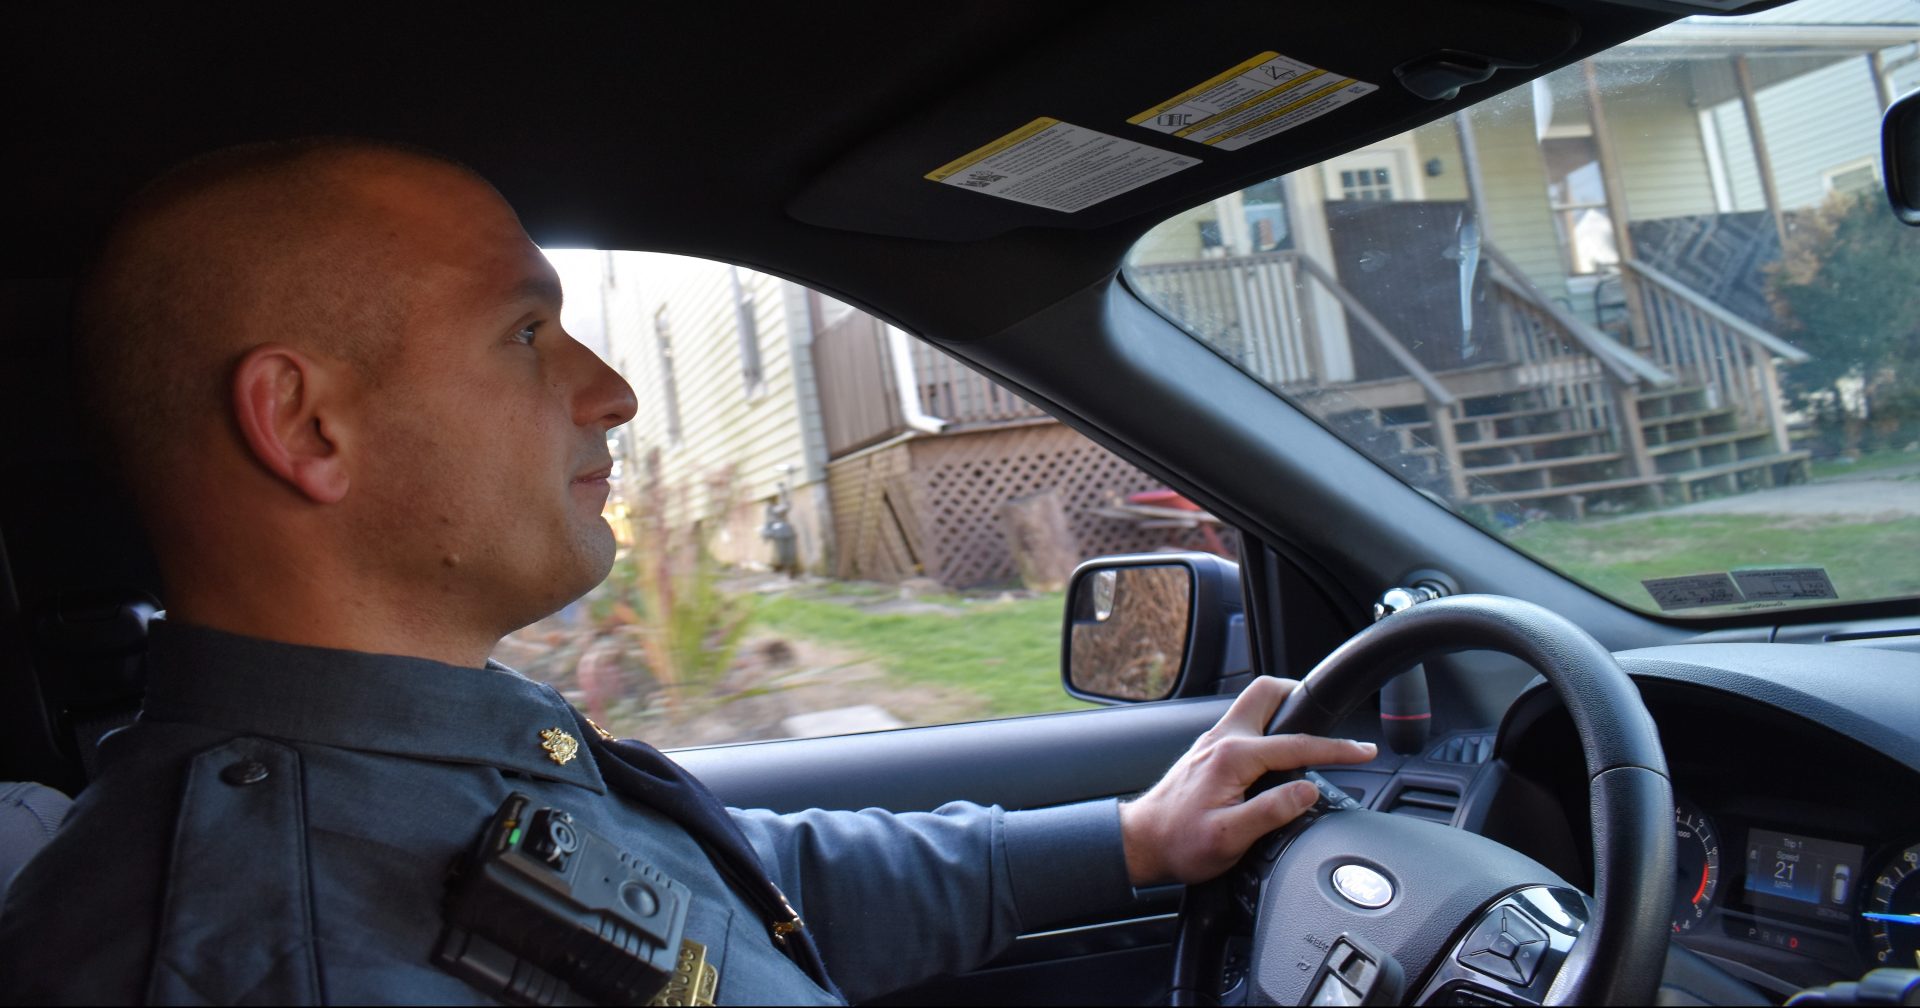 Corporal Paul Antonucci drives back to the City of Coatesville Police Department headquarters after responding to a report of unattended children on Nov. 19, 2019.